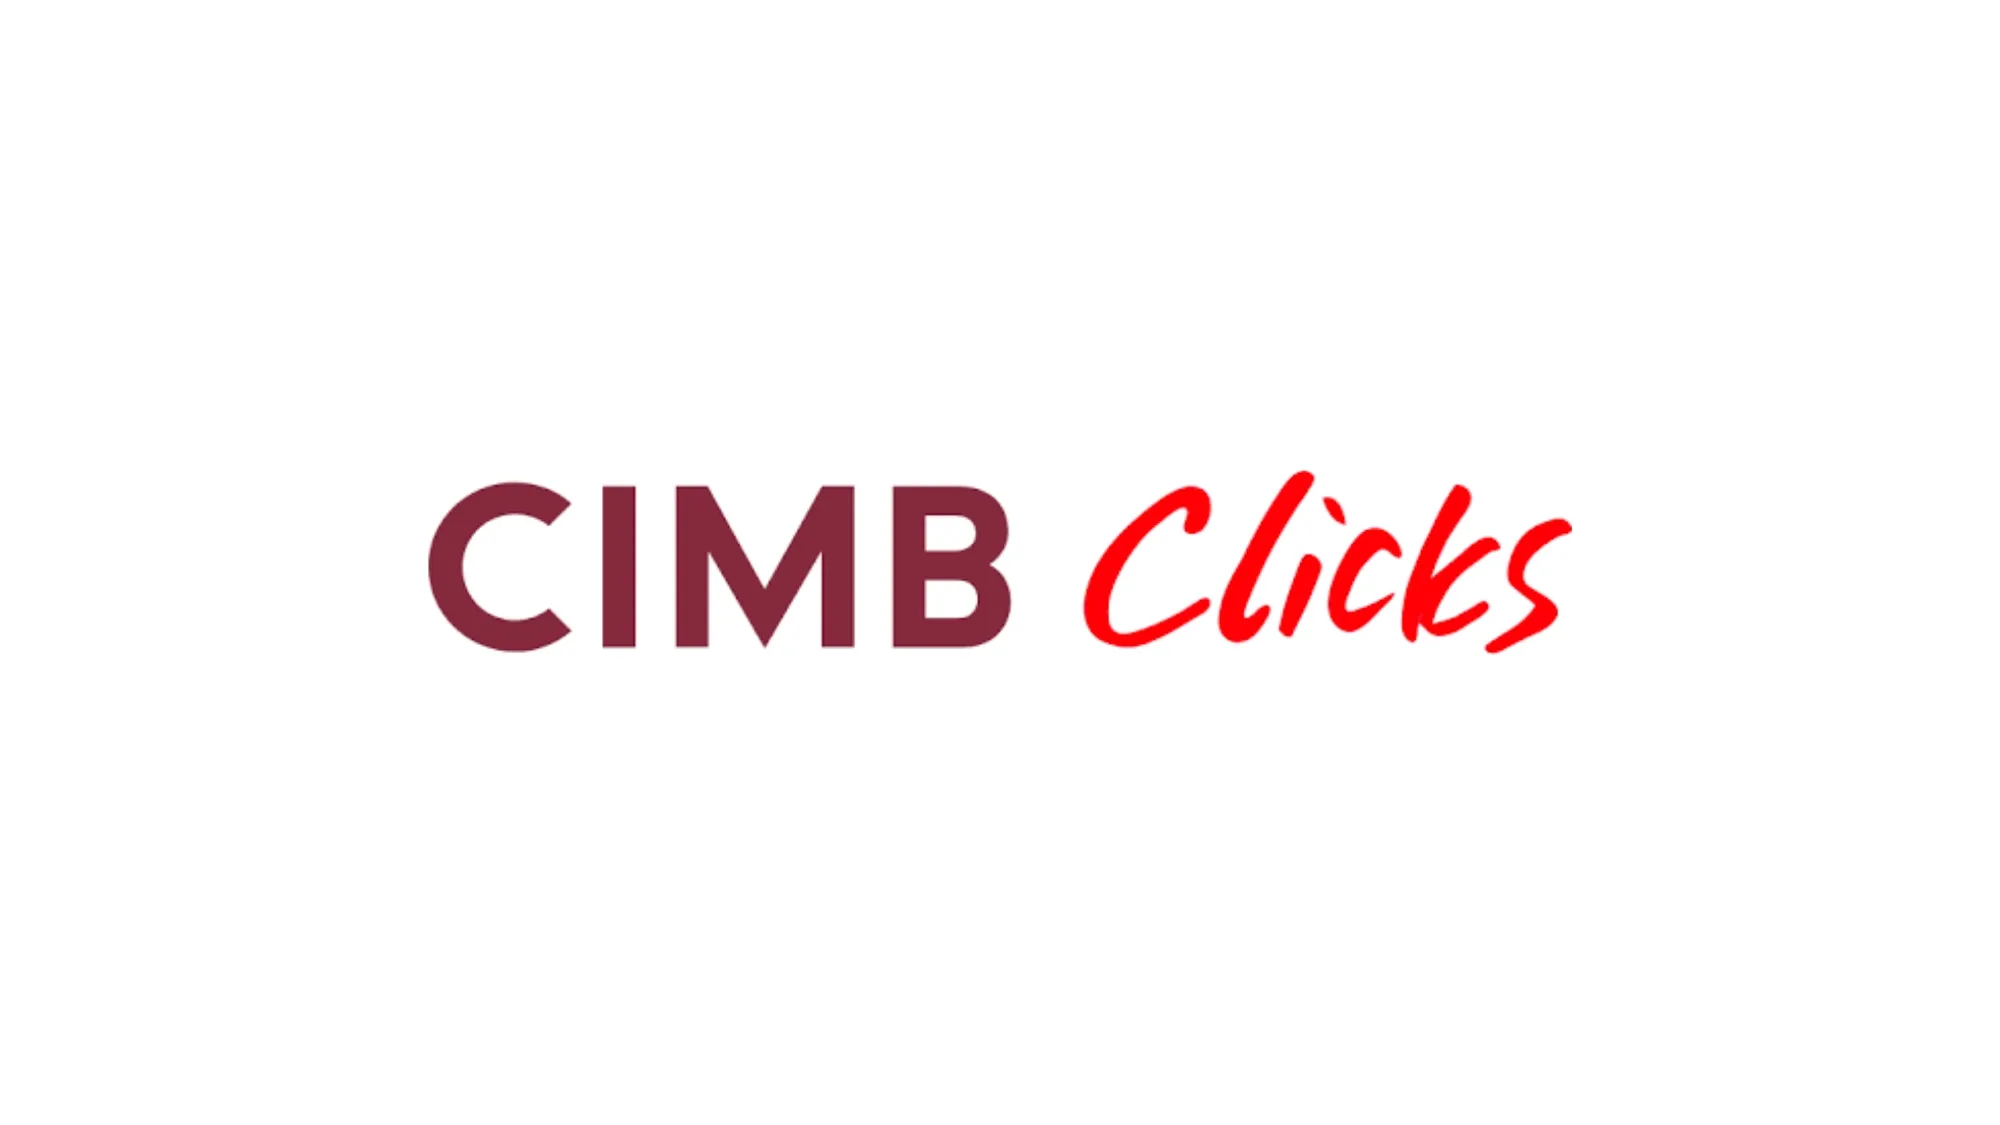 how to change cimb clicks phone number